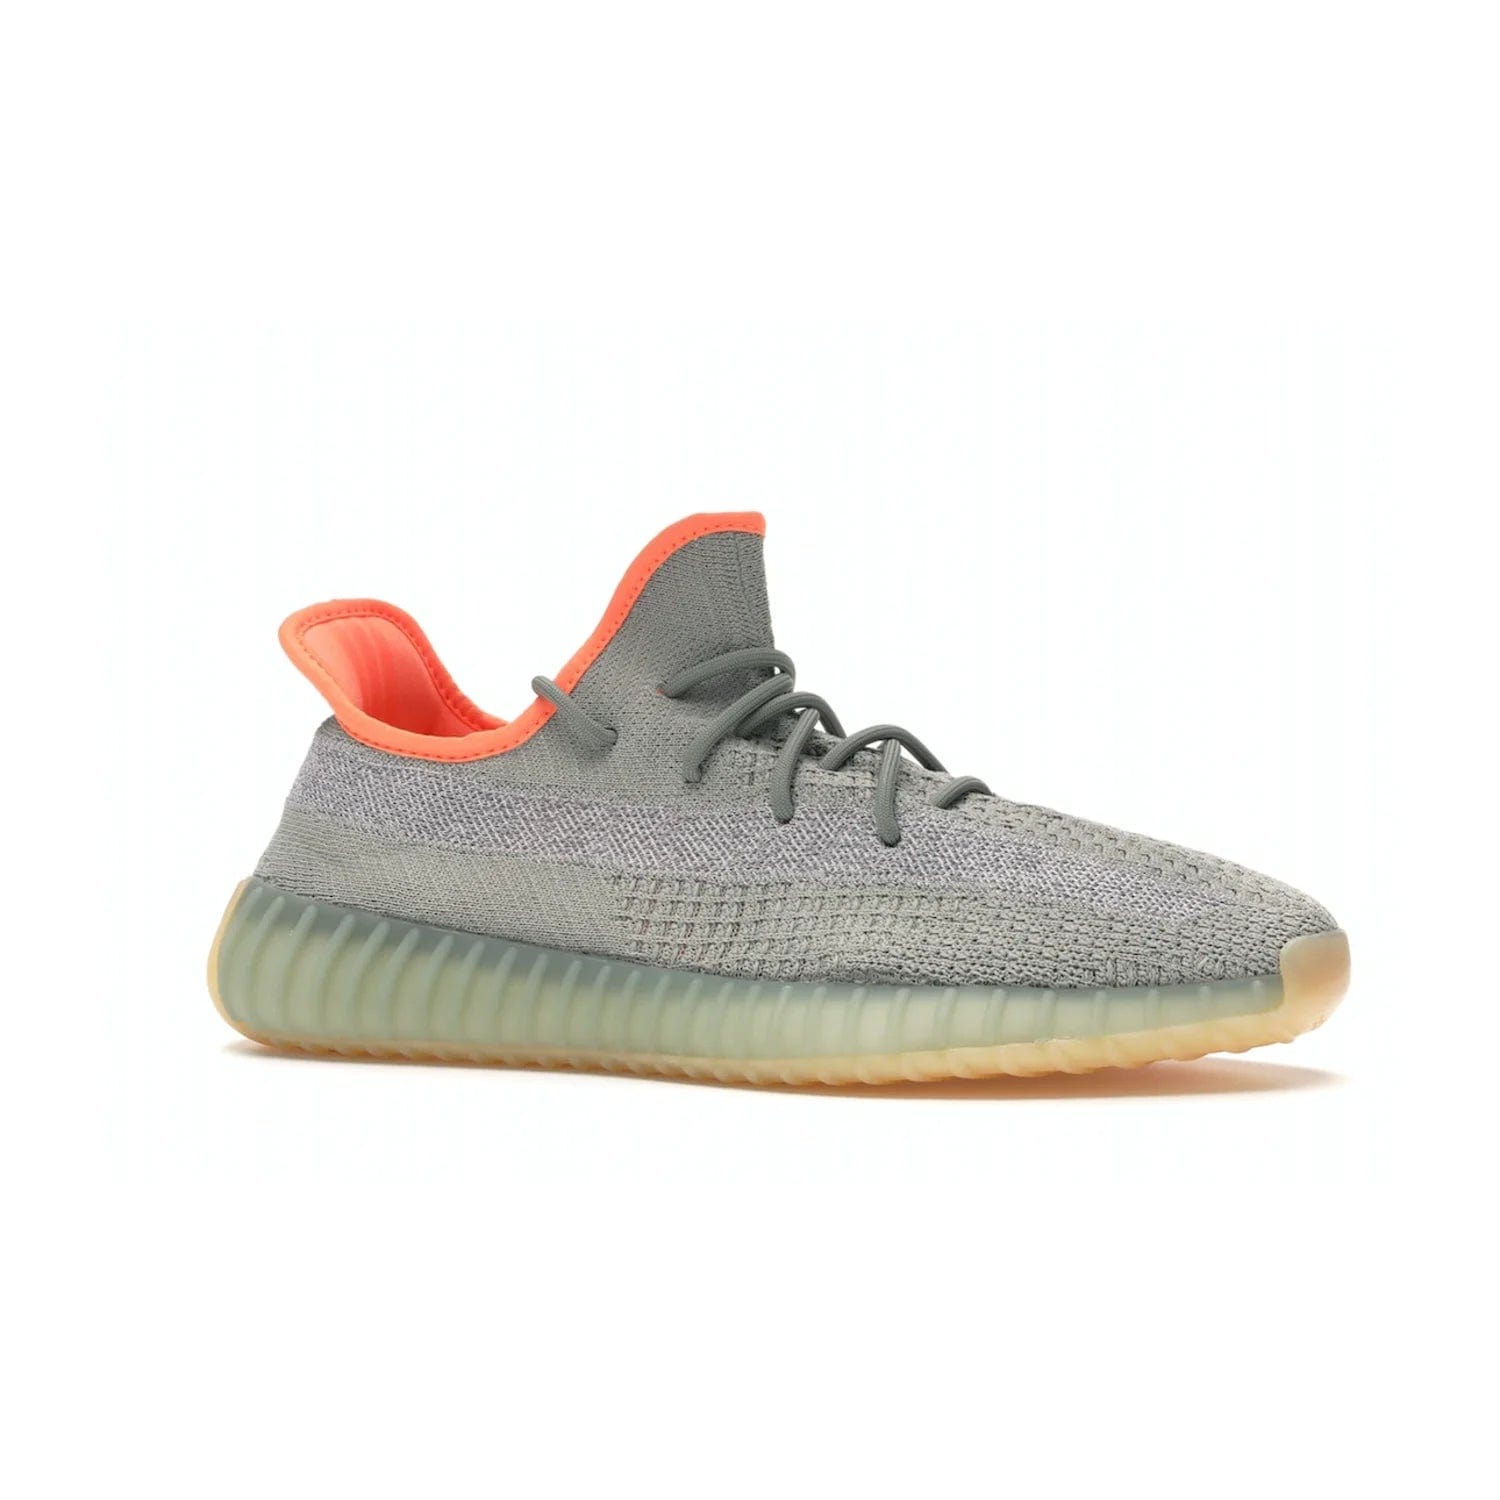 adidas Yeezy Boost 350 V2 Desert Sage - Image 3 - Only at www.BallersClubKickz.com - Upgrade your style with the adidas Yeezy Boost 350 V2 Desert Sage. This 350V2 features a Desert Sage primeknit upper with tonal side stripe, and an orange-highlighted translucent Boost cushioning sole. Stay on-trend in effortless style.